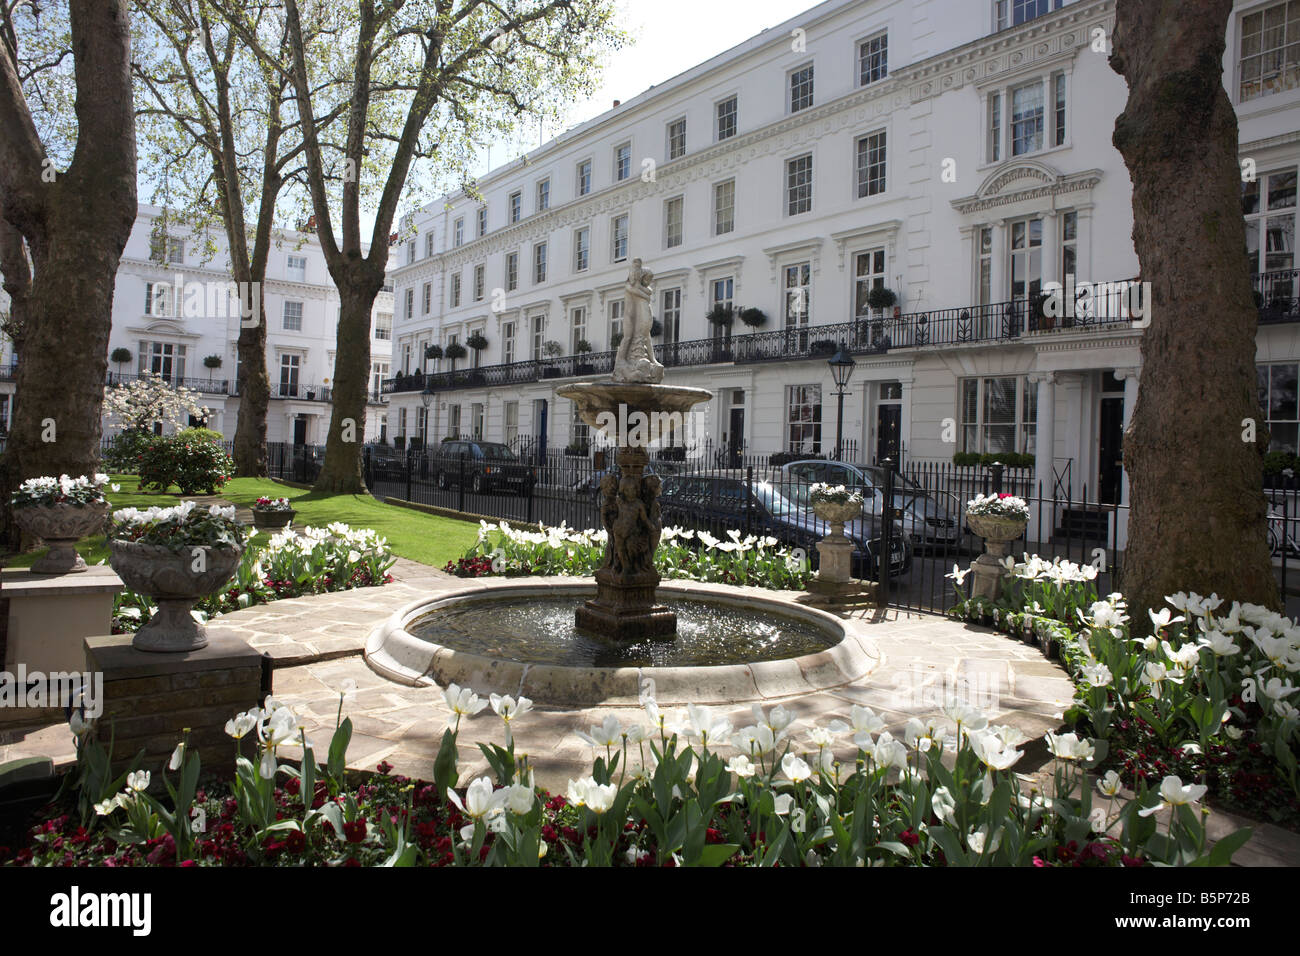 Identical white-painted properties and ornamental fountain with central garden area in exclusive Wellington Square London SW3 Stock Photo